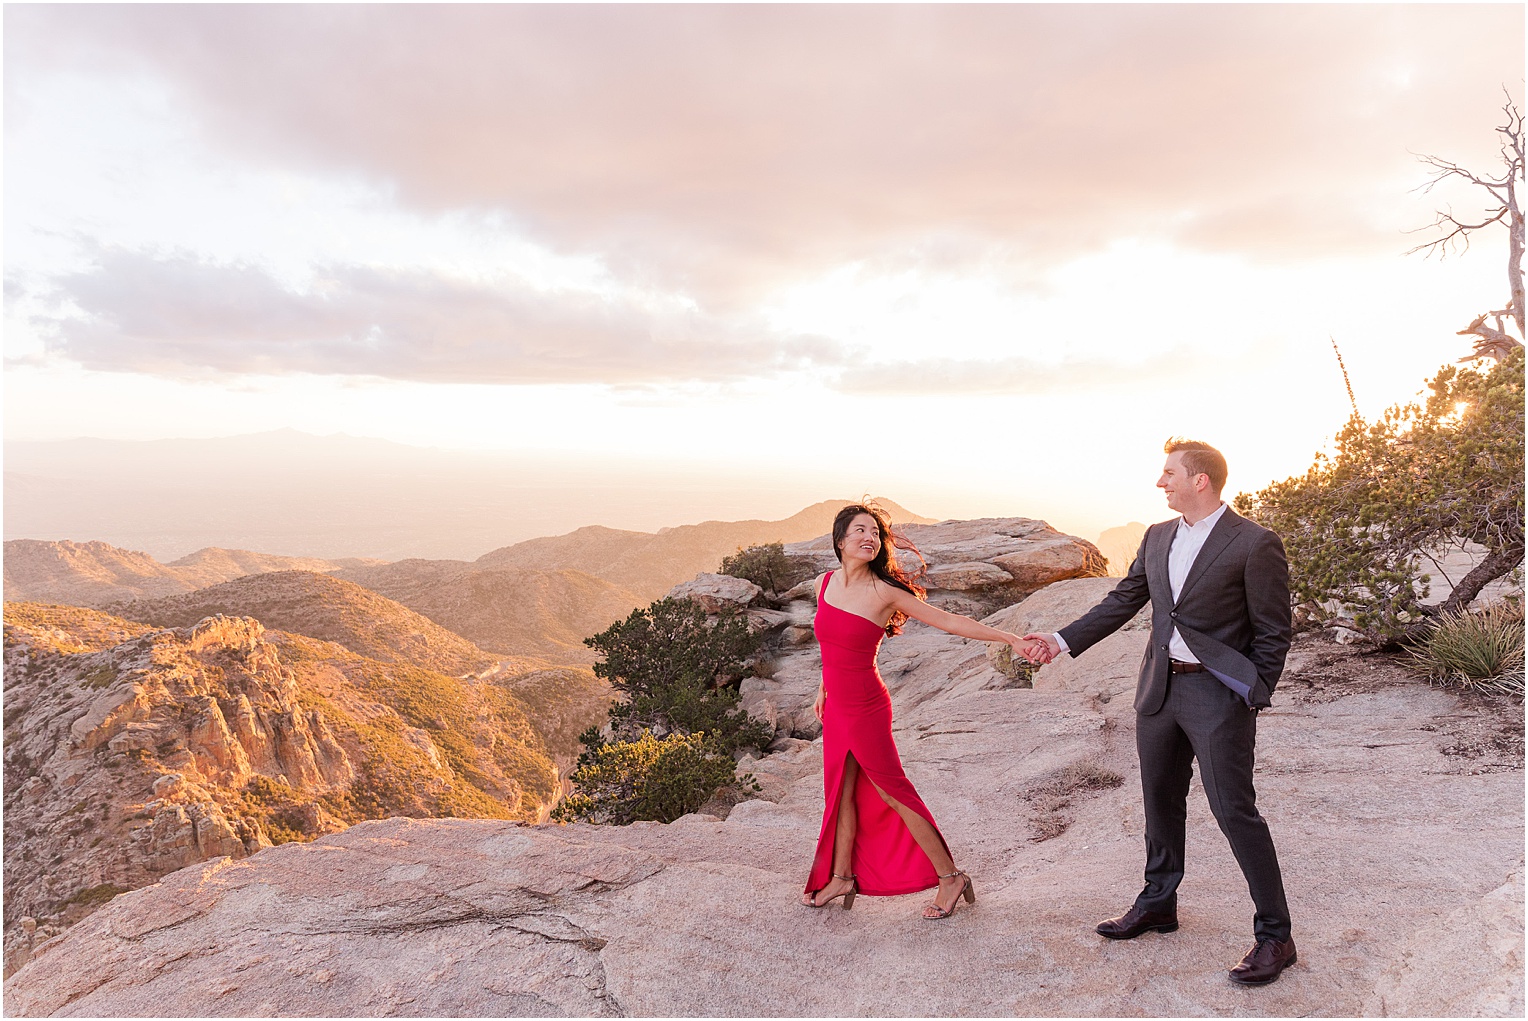 Sunset Photo Session on Mount Lemmon Tucson, AZ Katrina + Nick romantic engagement photo session with bride in a classic red dress and dramatic mountain views in background